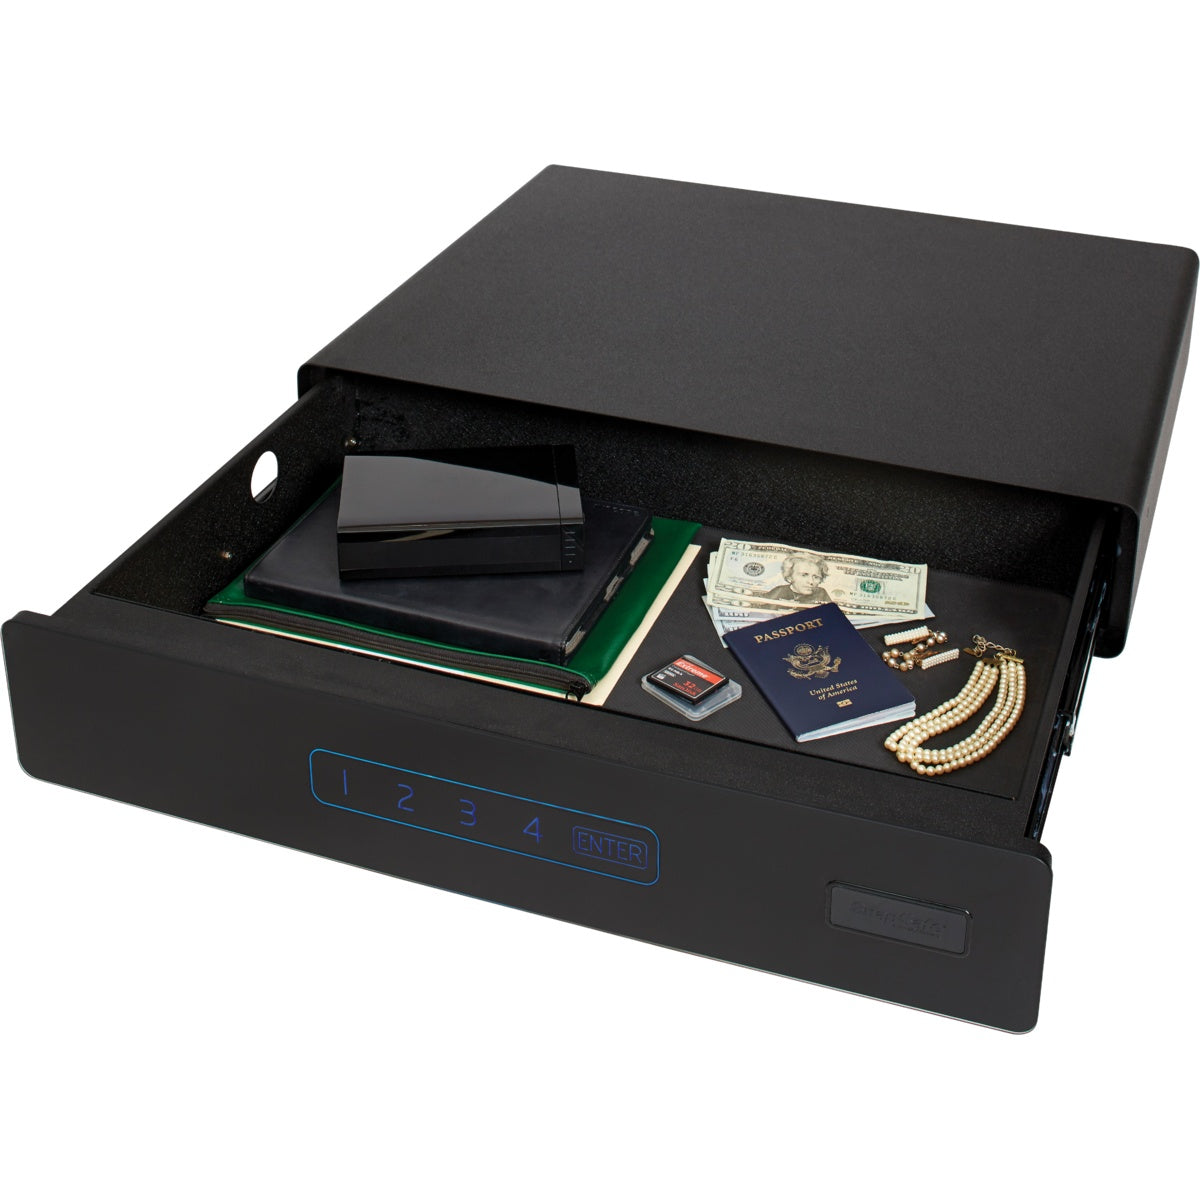 SnapSafe 75402 Under Bed Safe Medium Open with Passports and Jewelry